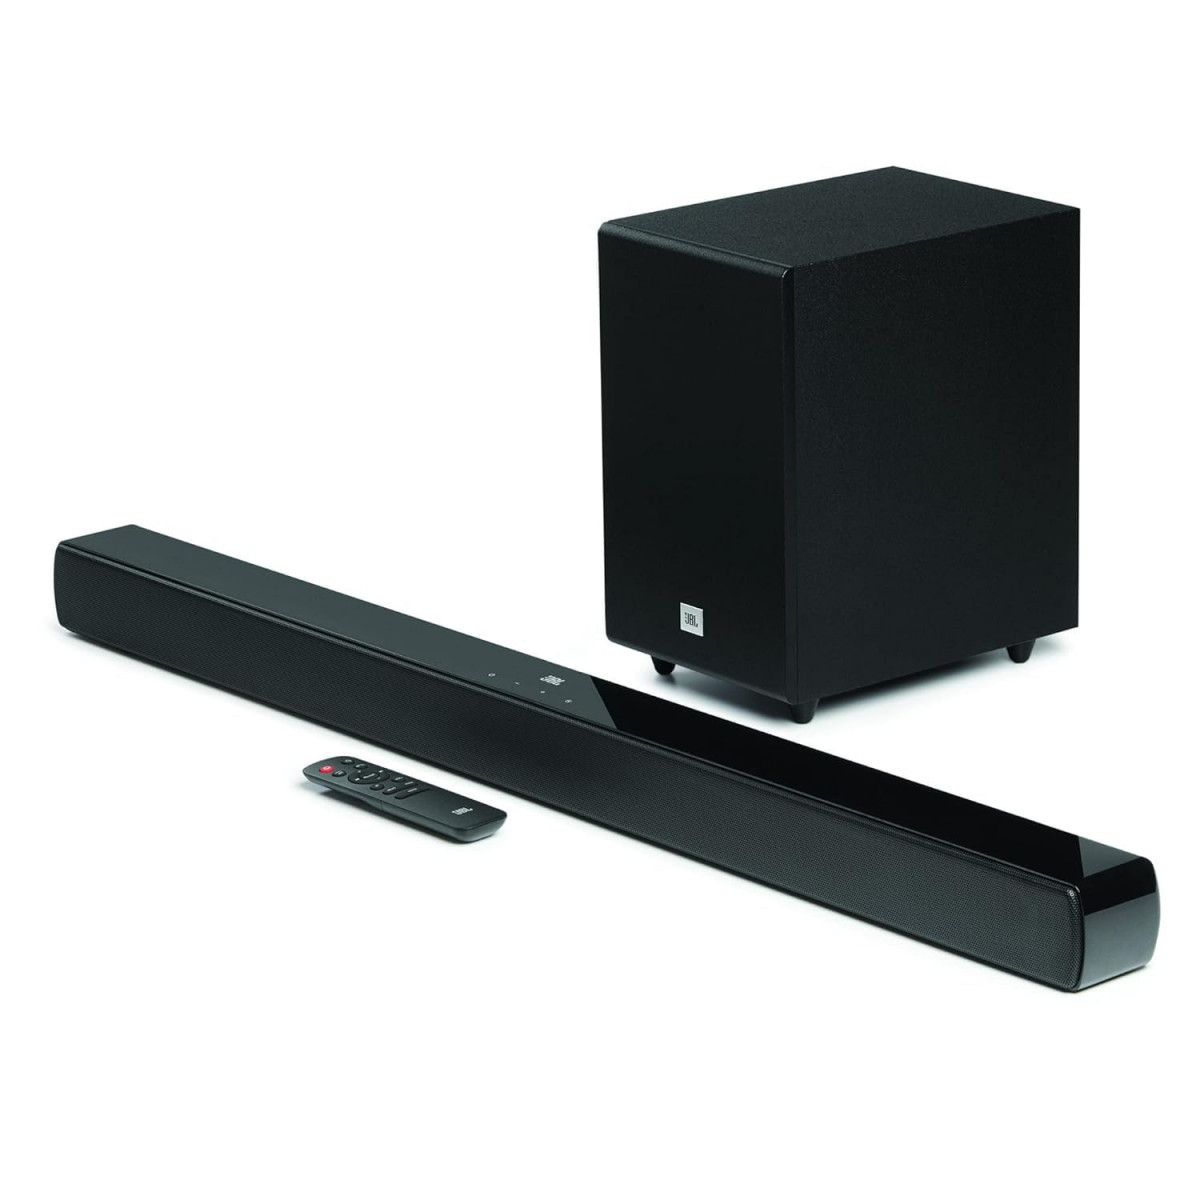 JBL Cinema SB140 Dolby Digital Soundbar with Wired Subwoofer for Extra Deep Bass 21 Channel Home Theatre with Remote HDMI ARC Bluetooth  Optical Connectivity 110W